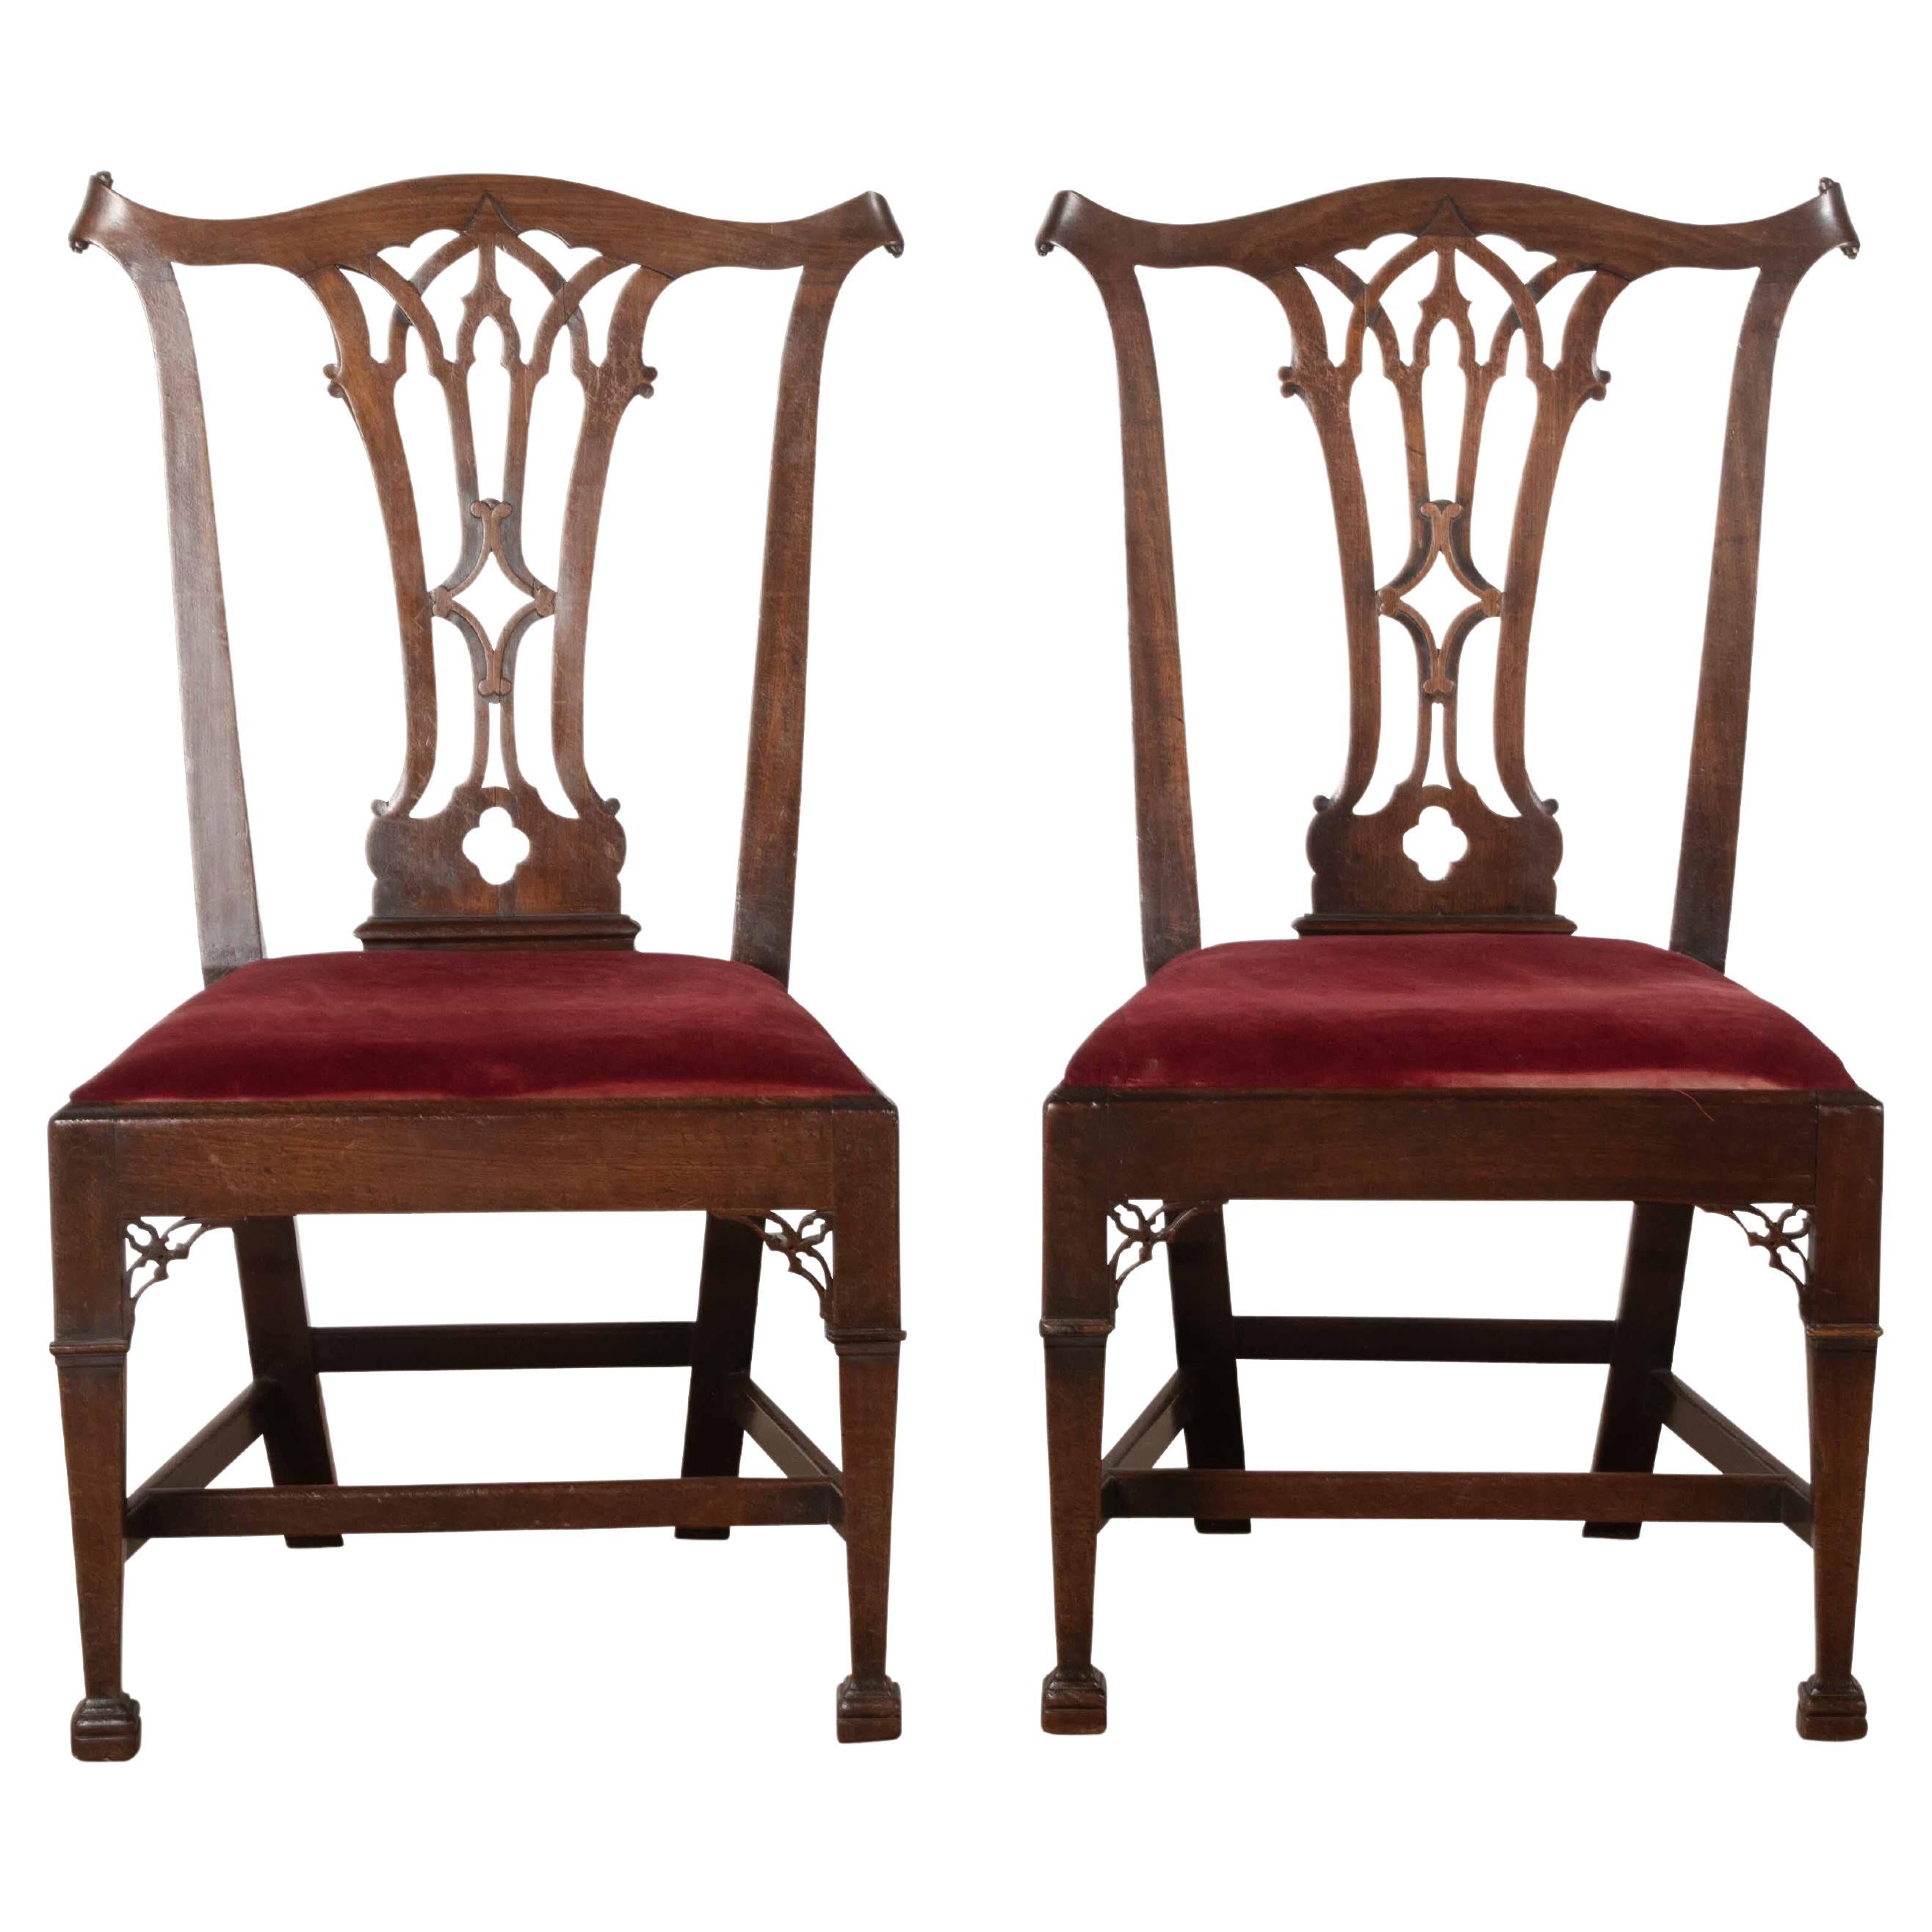 Pair of C18th Mahogany Side Chairs